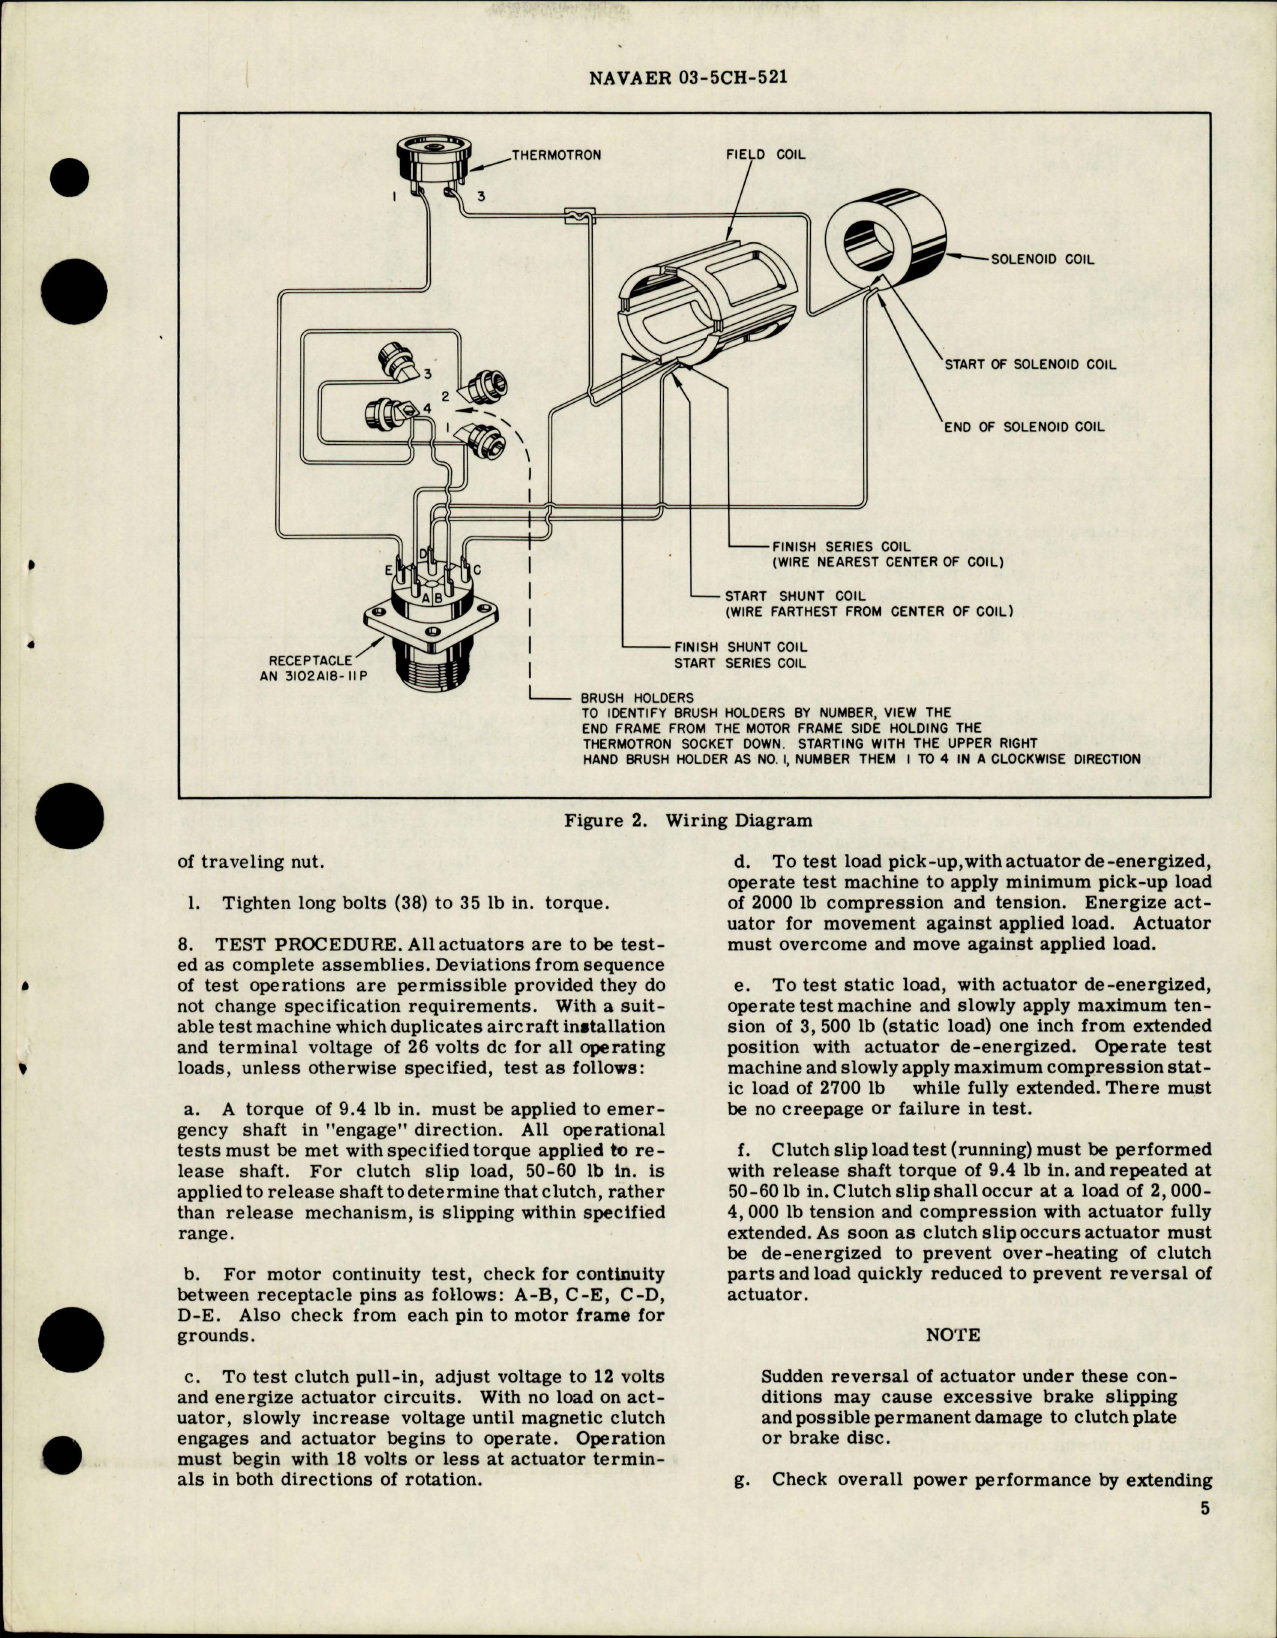 Sample page 5 from AirCorps Library document: Overhaul Instructions with Parts Breakdown for Actuator - Models A7621-1F and A7621-1G